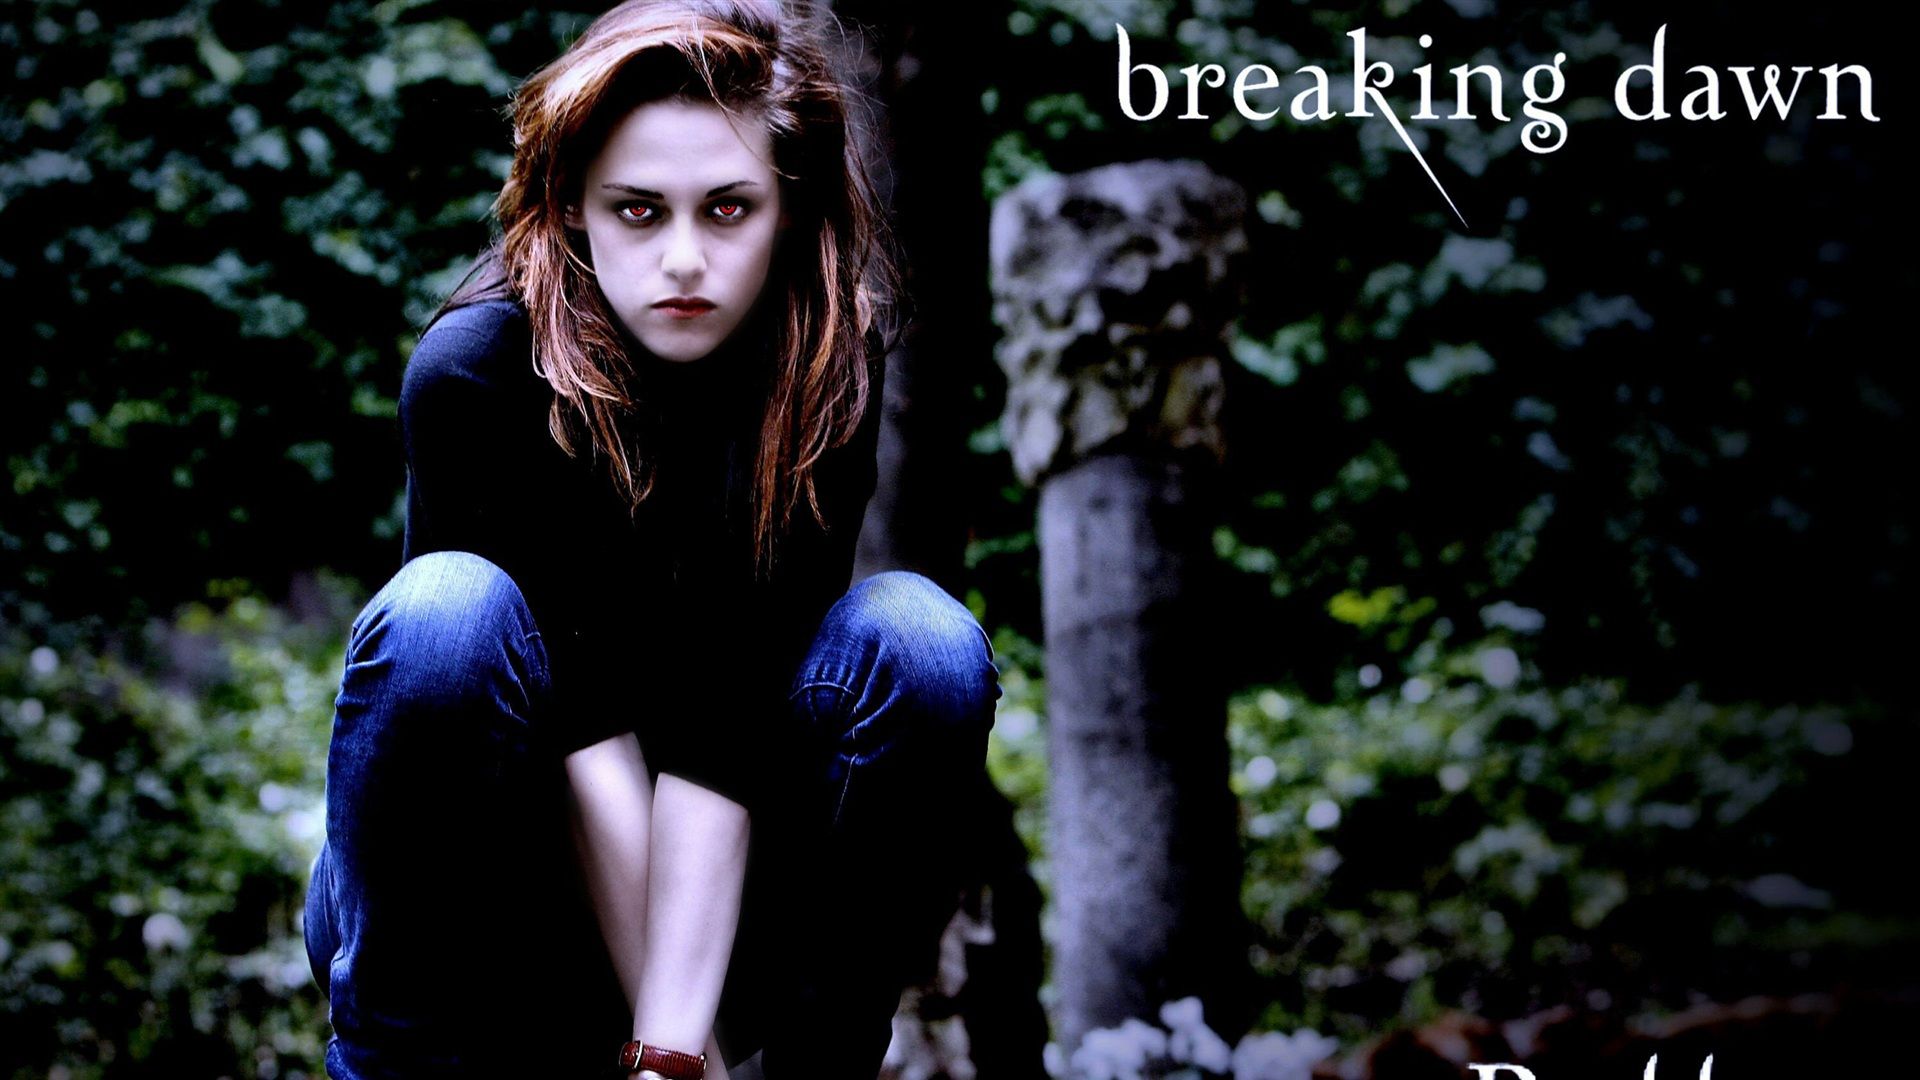 A girl sitting on the ground with her hands in front of herself - Twilight